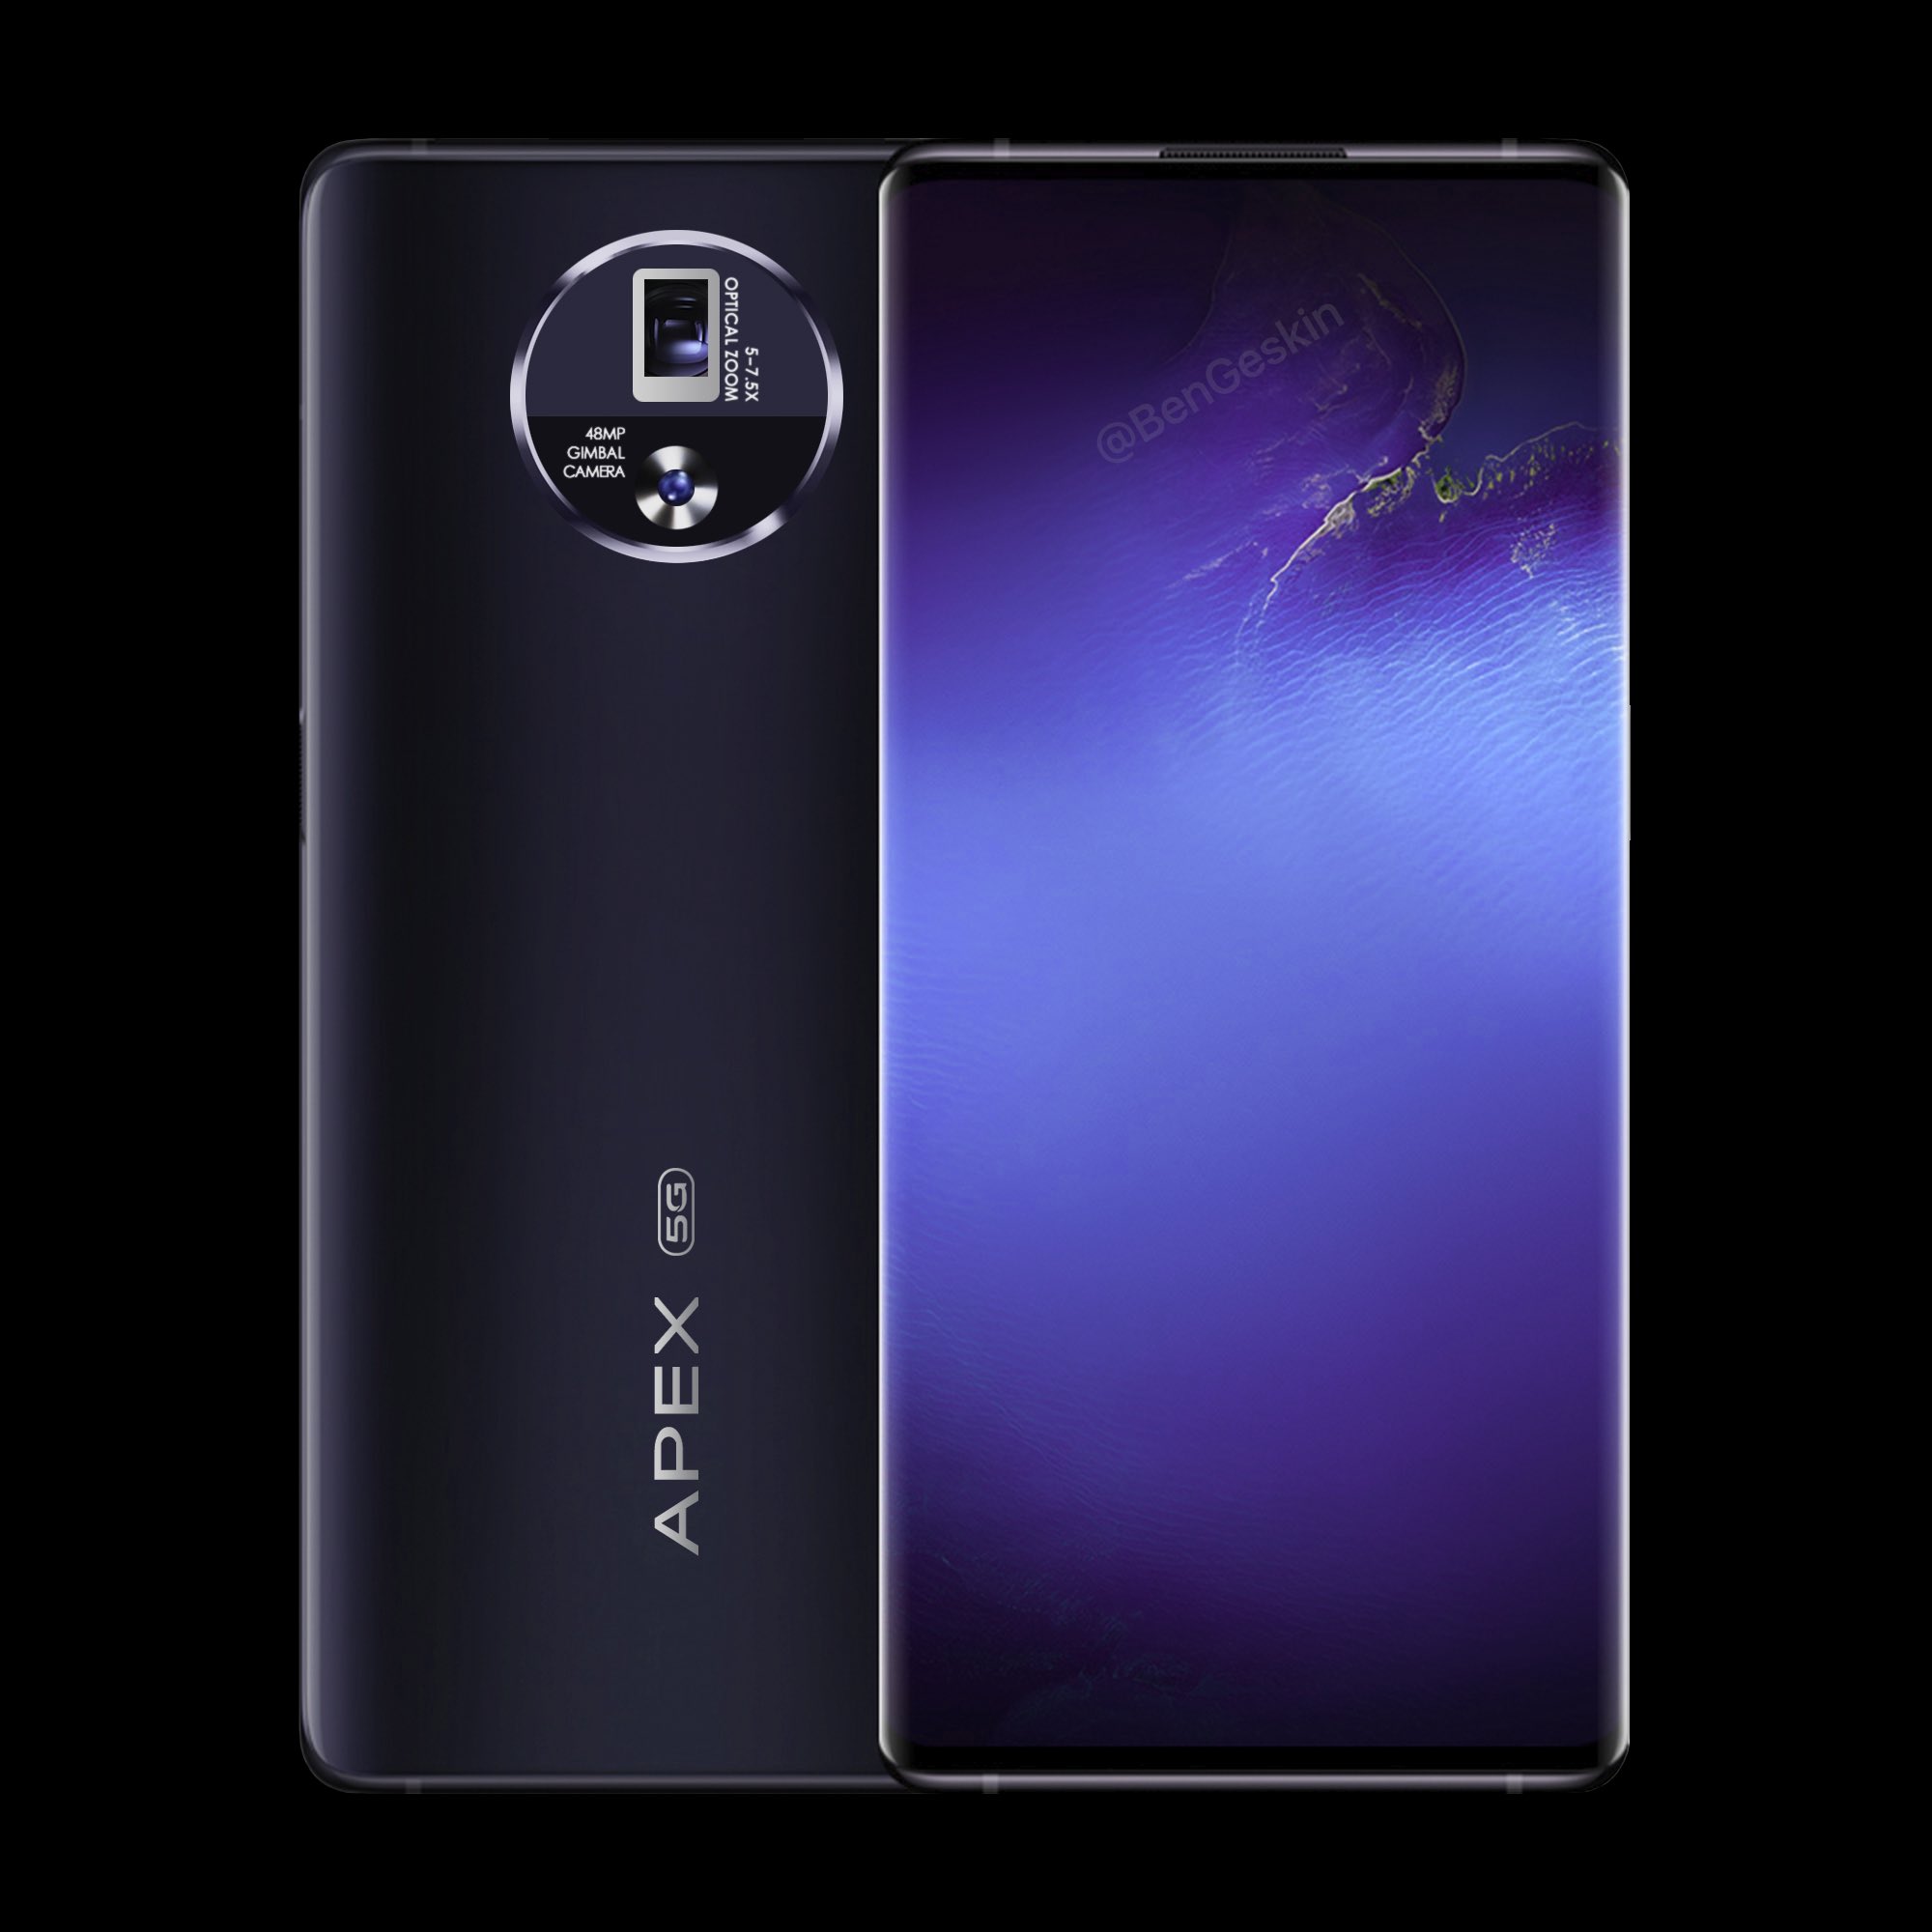 Vivo Apex 2020 Concept Phone Unofficial Renders Reveal The Front